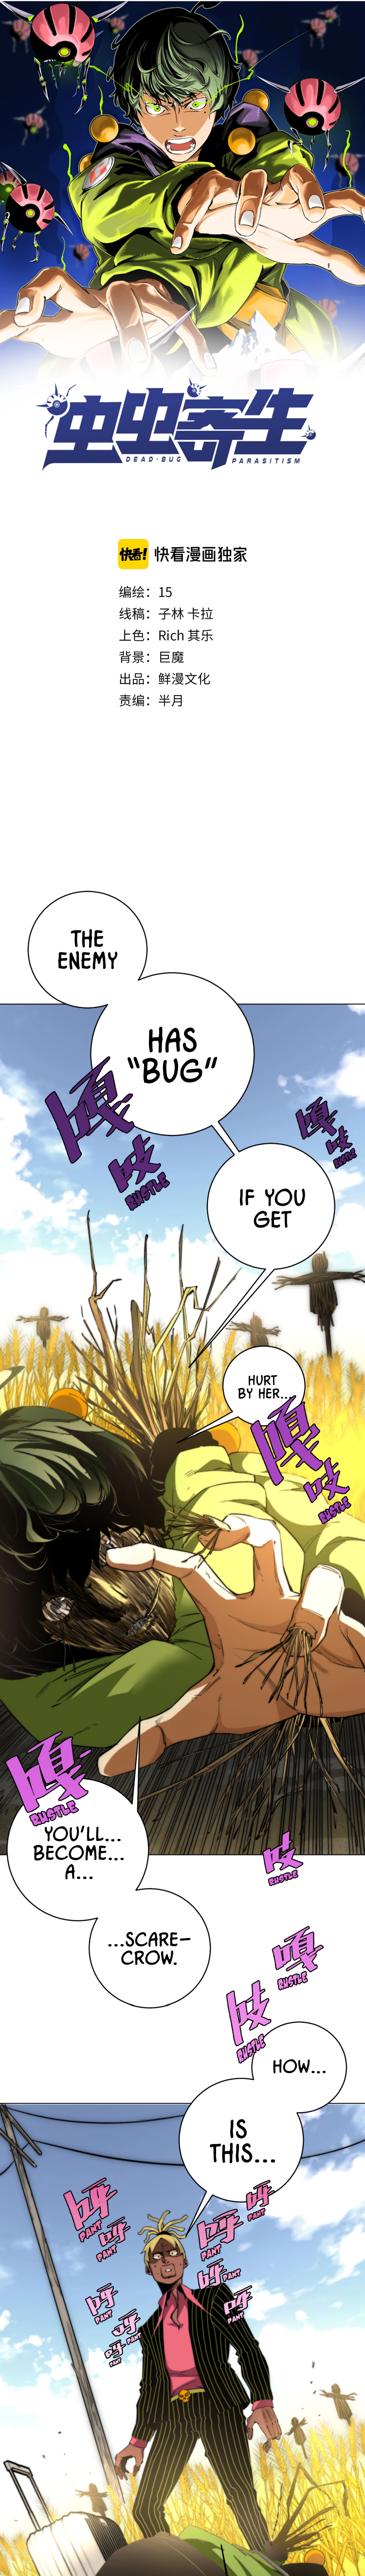 Dead Bug Parasitism Ch. 5 A Difficult Choice Between Two